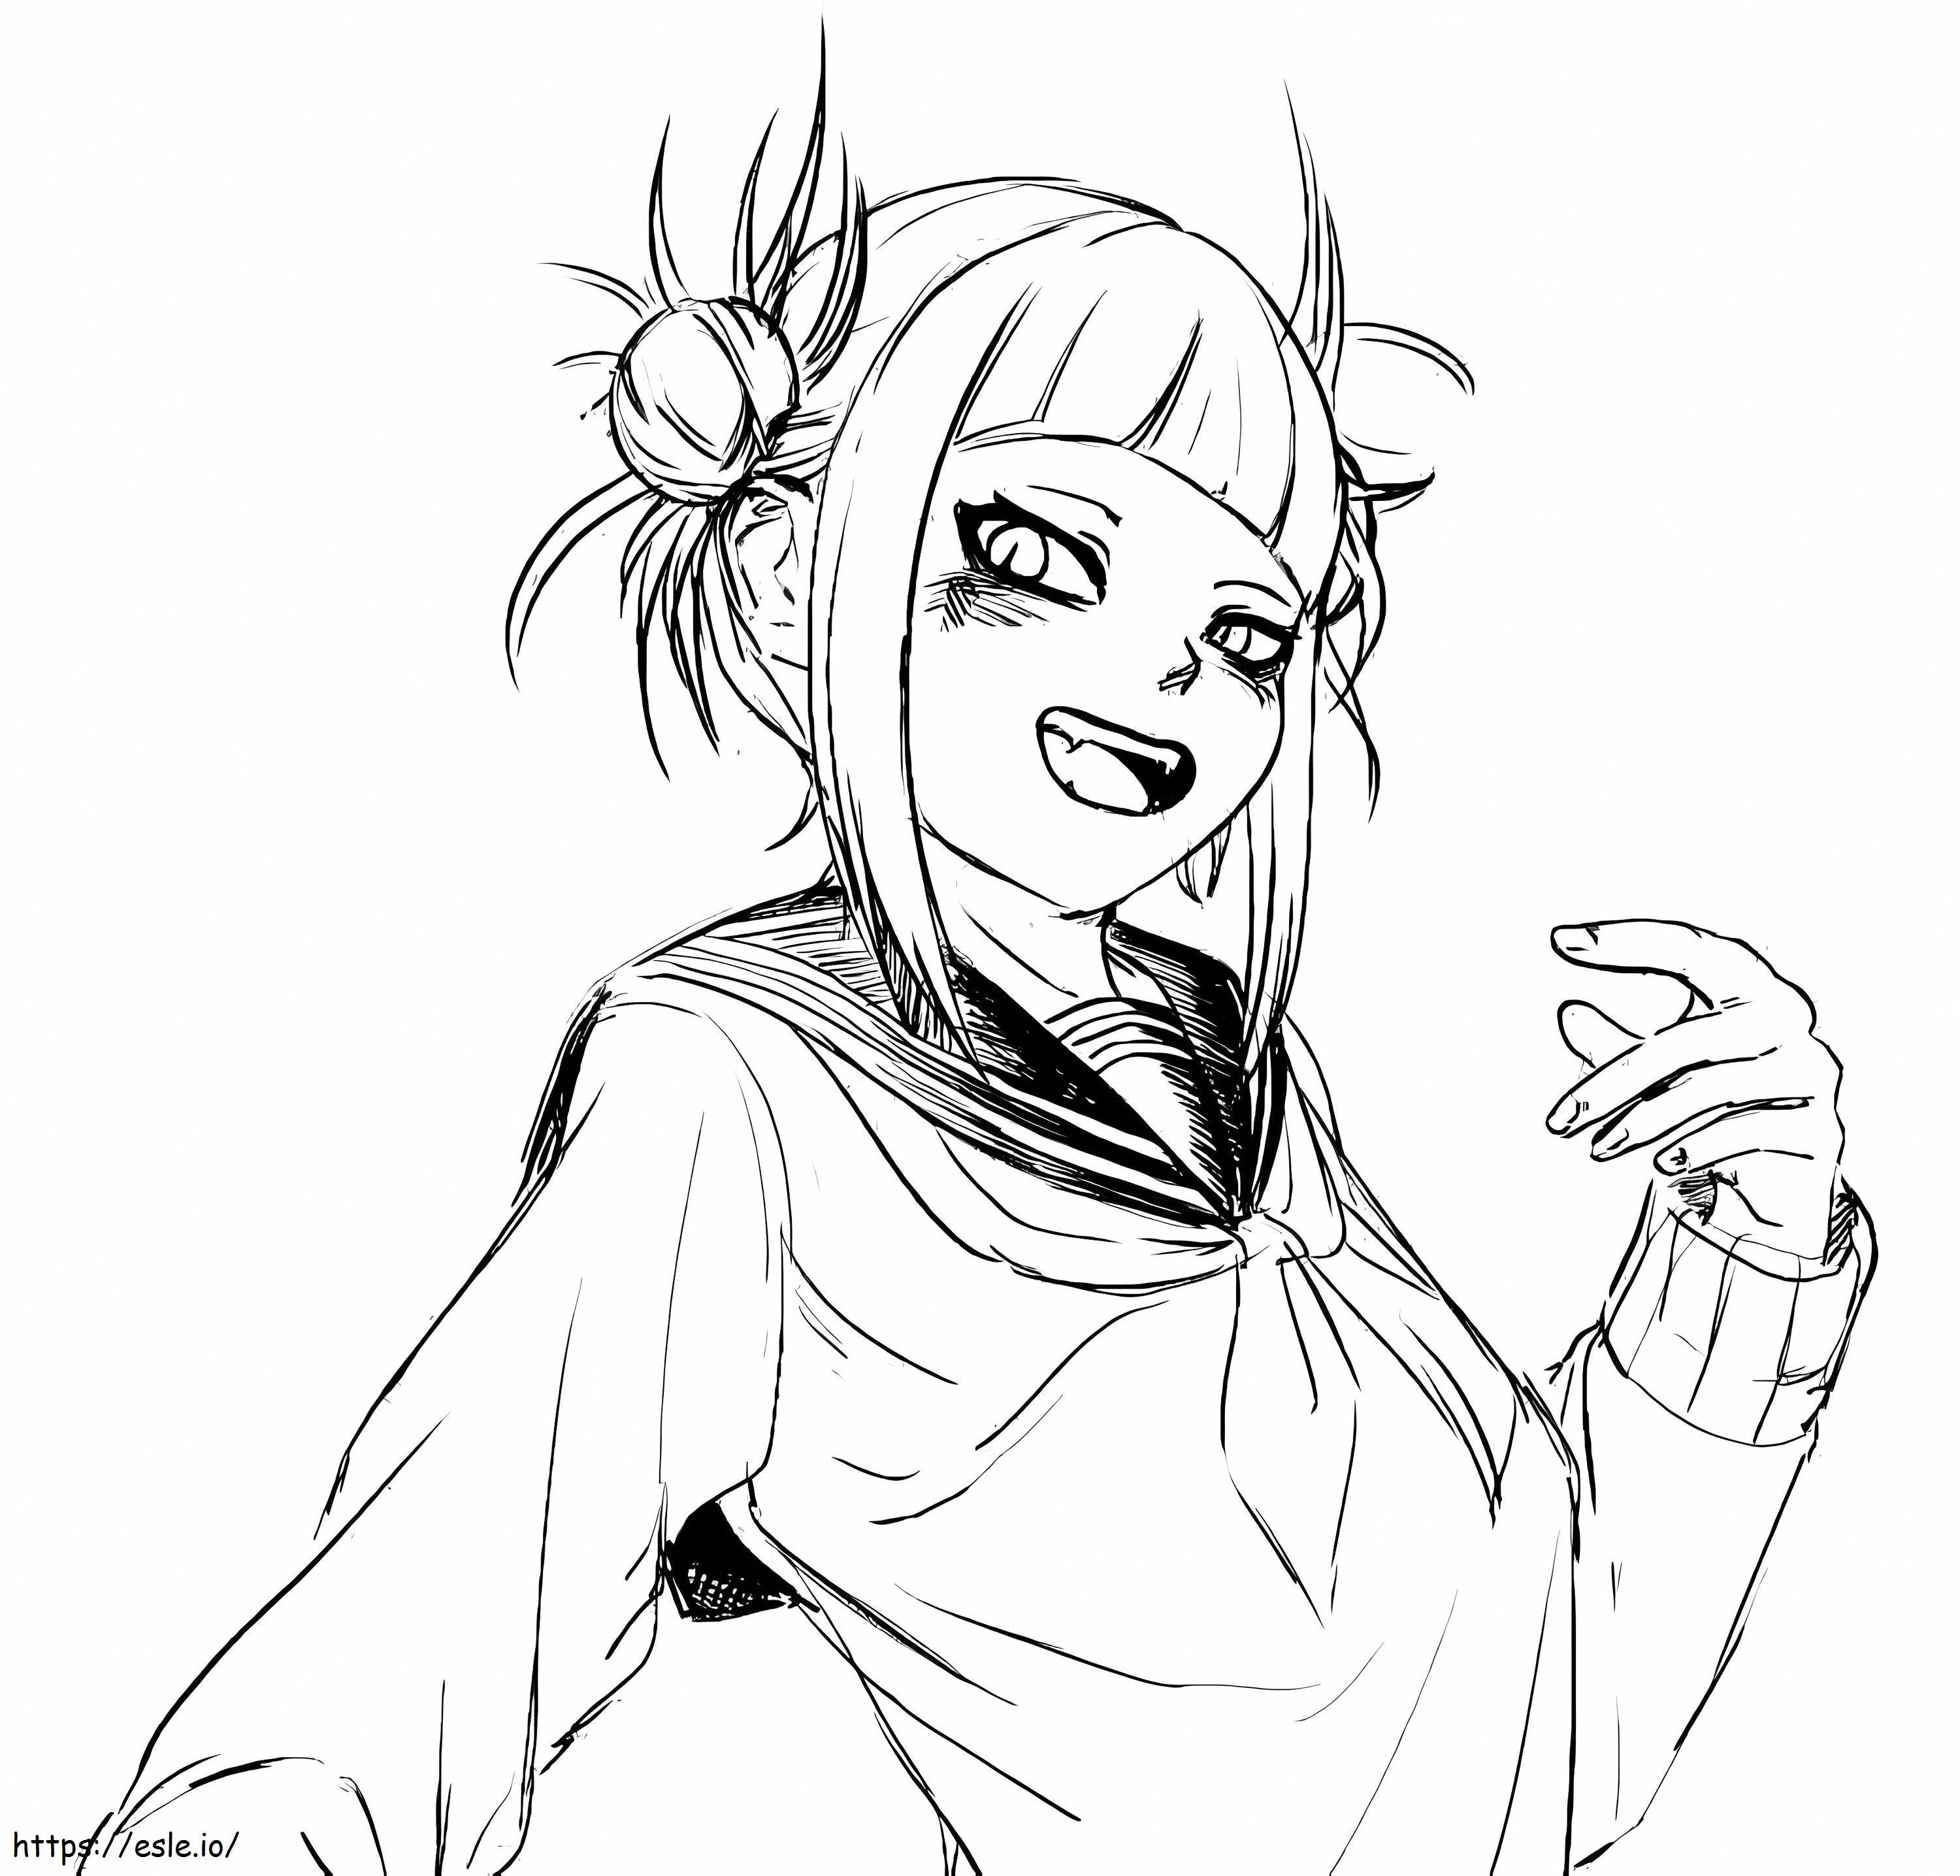 Himiko Toga Smiling coloring page